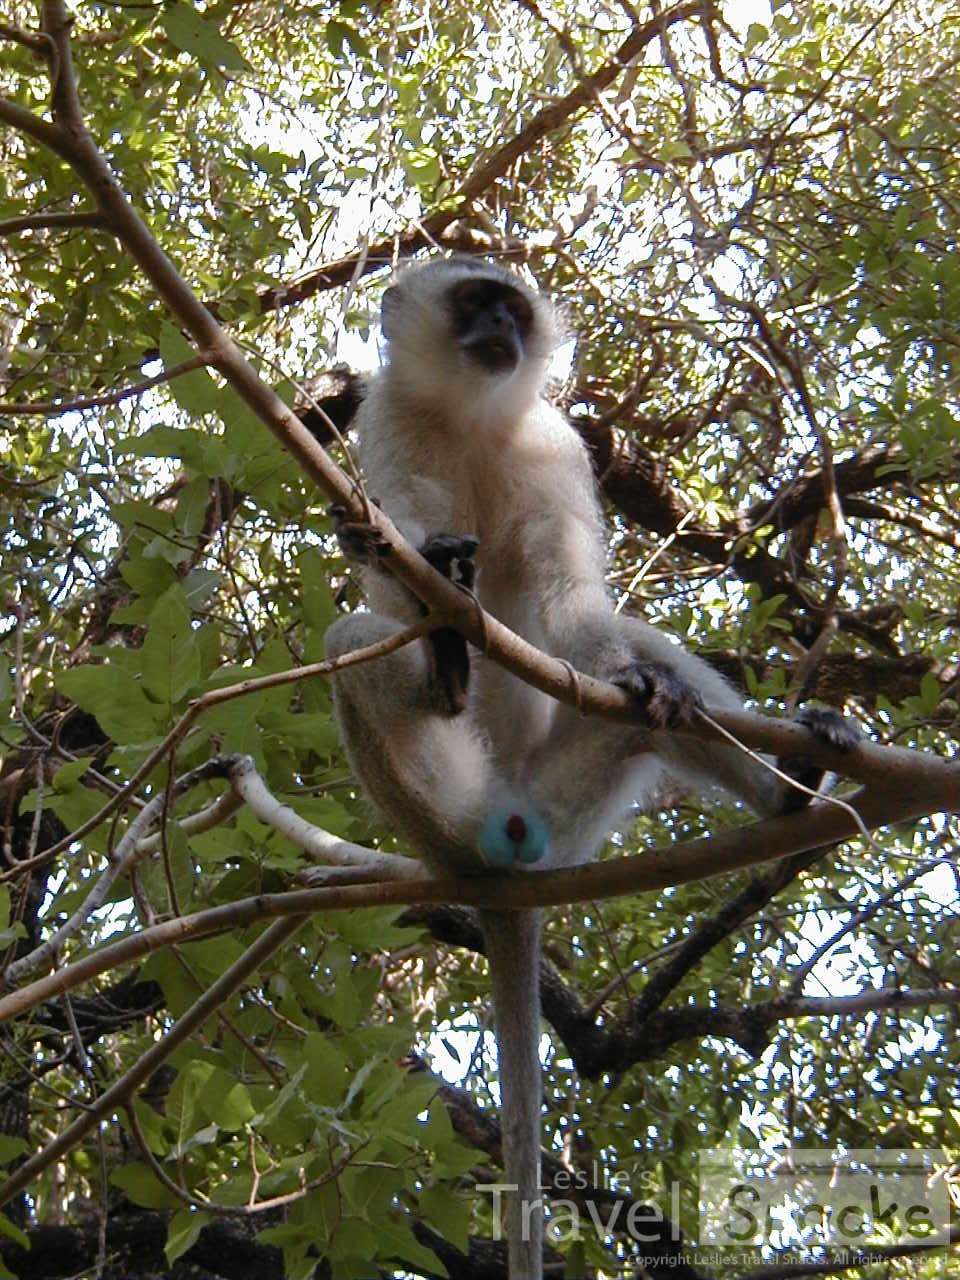 We looked up from our path by the falls to see this blue-balled monkey!